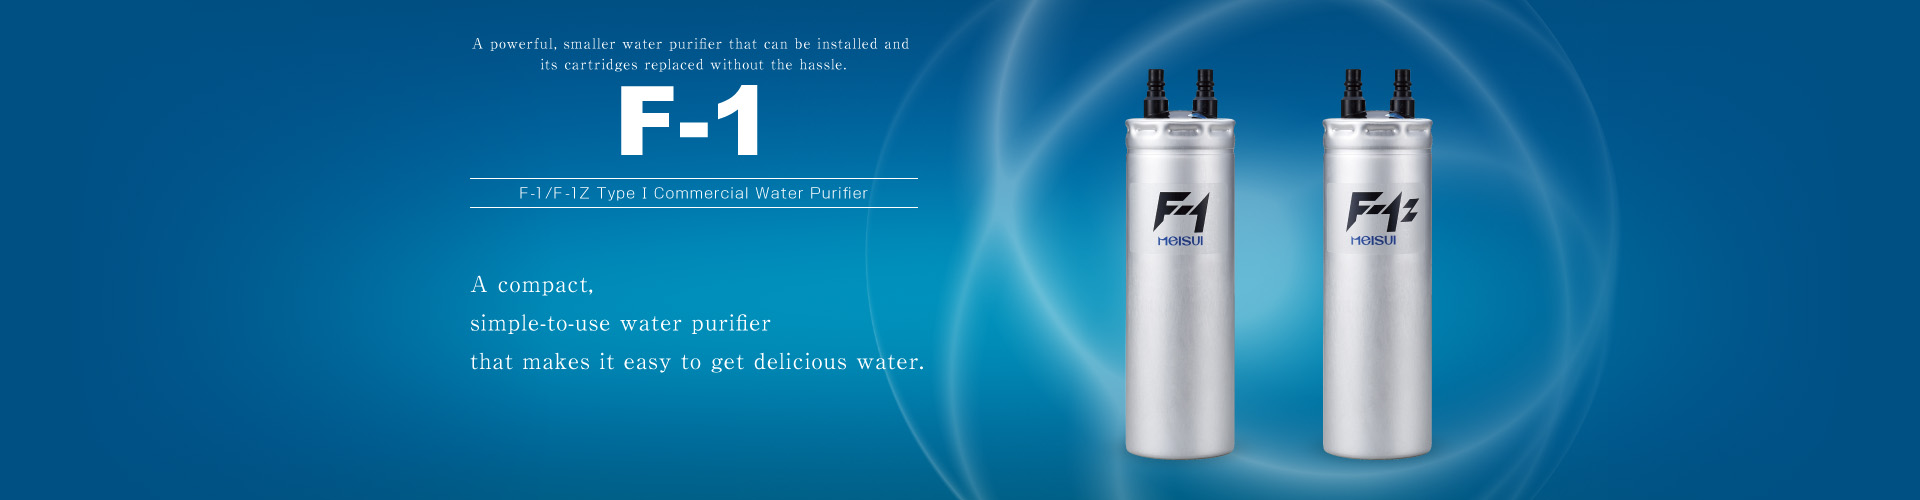 F Series Type I Commercial Water Purifier